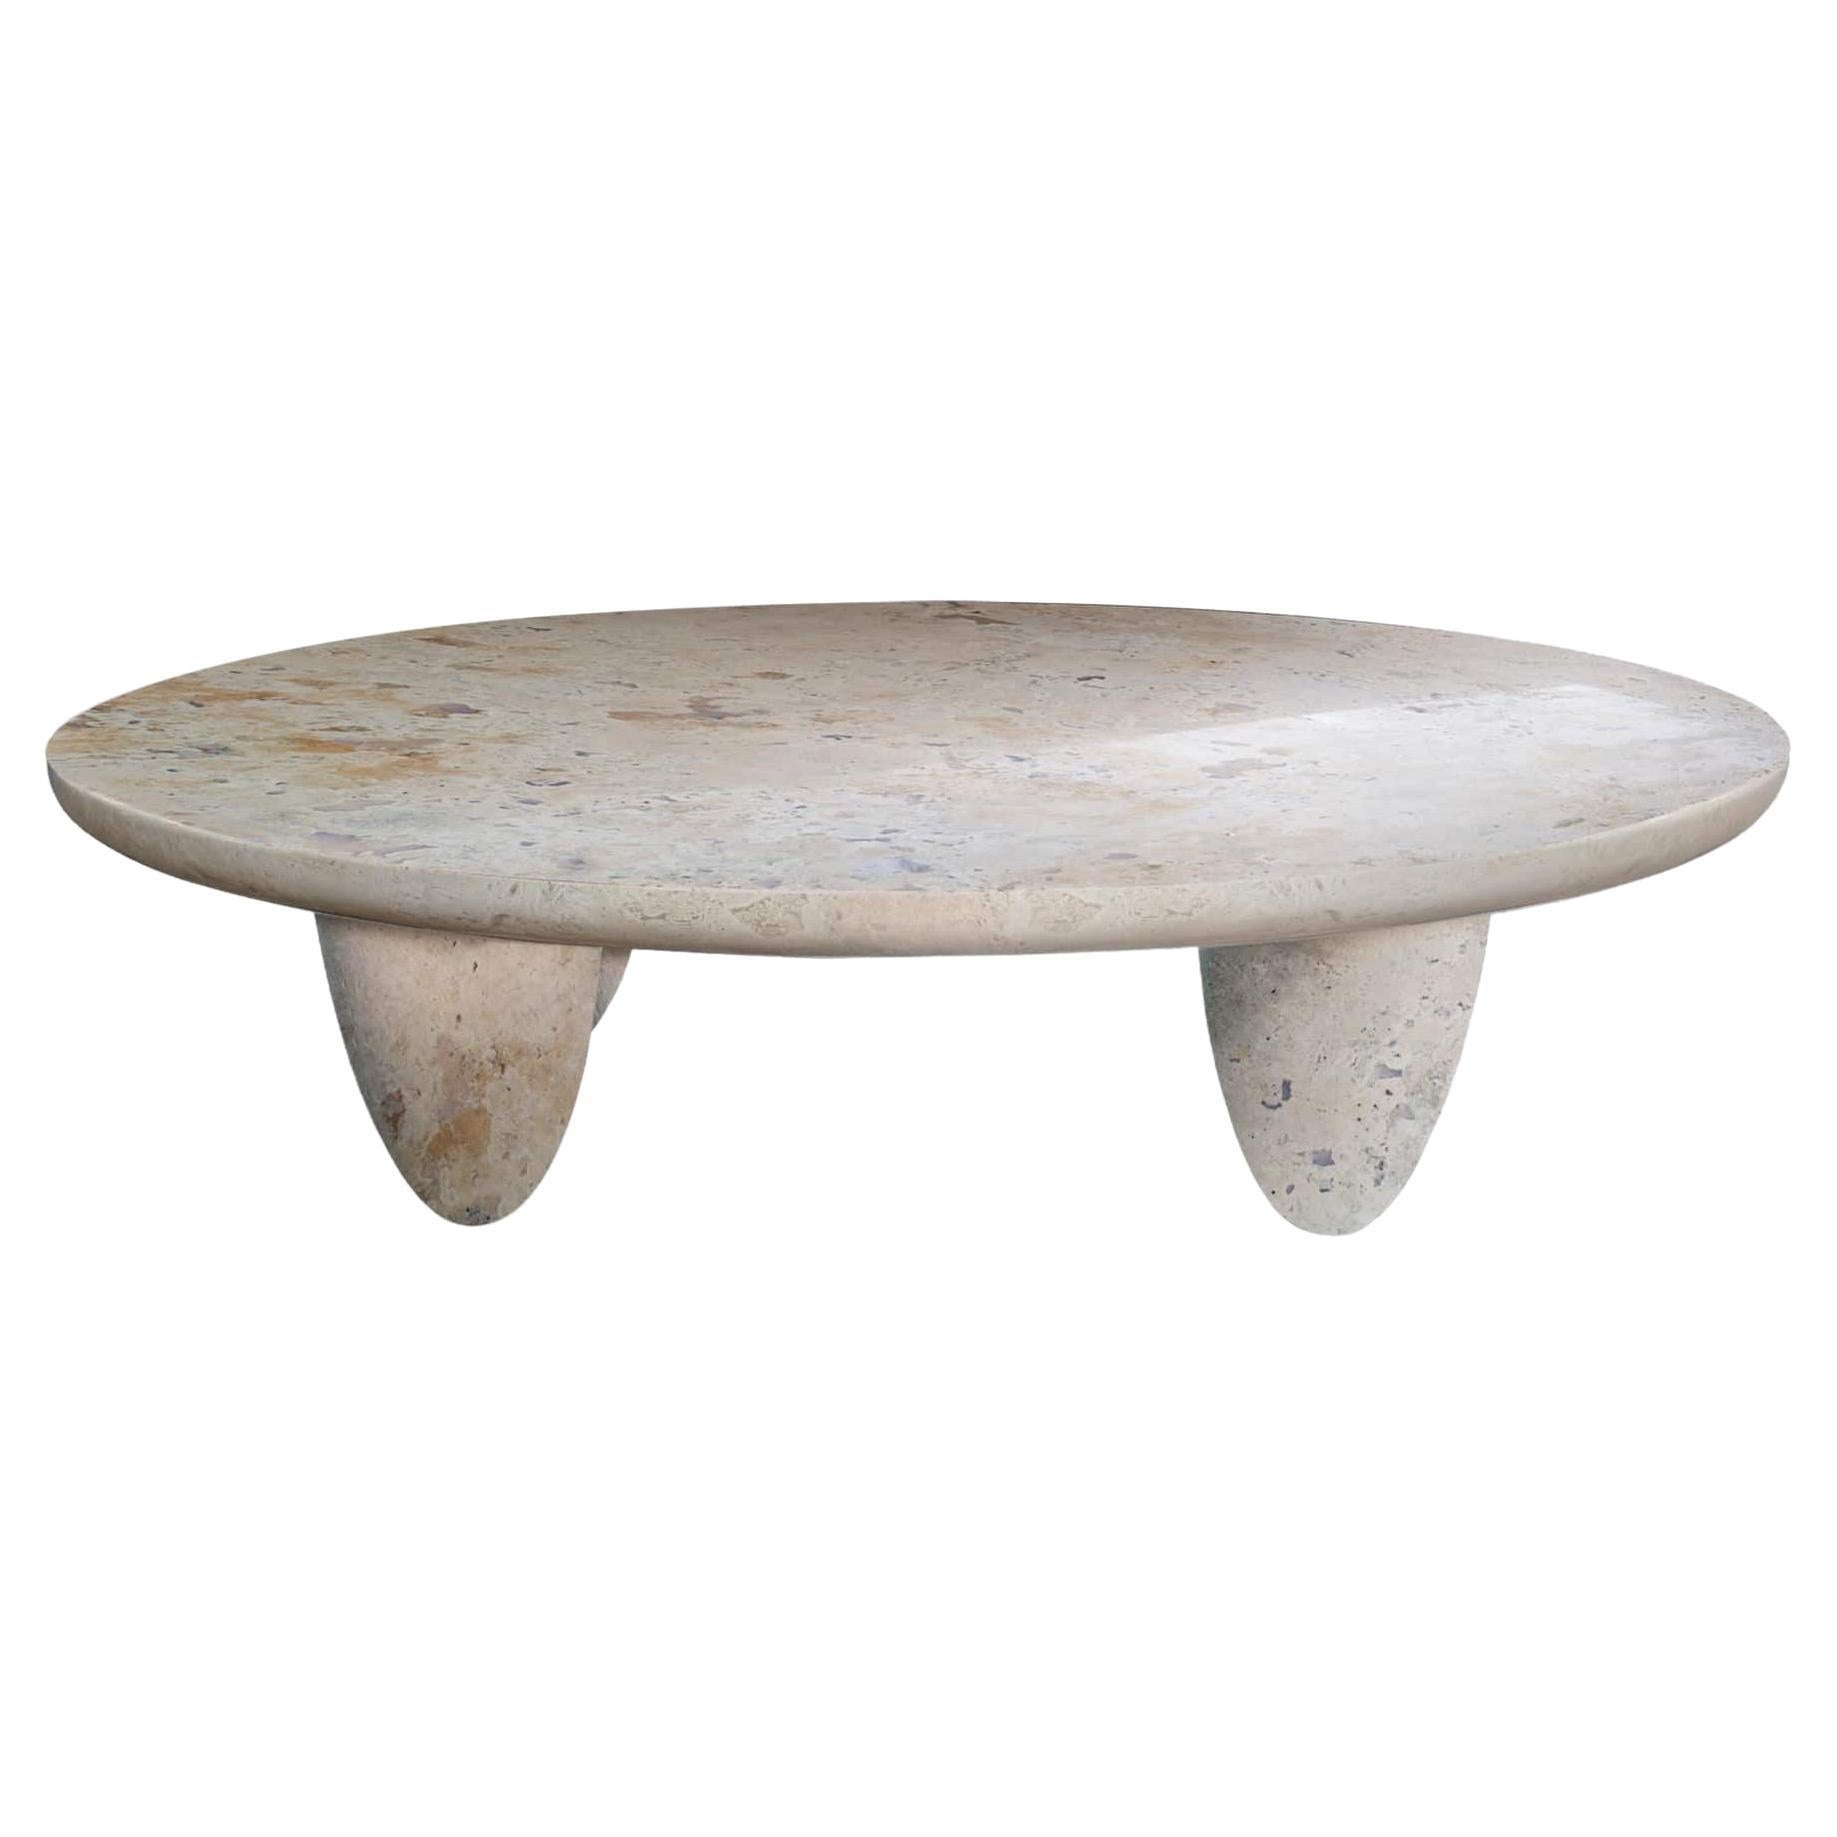 Contemporary Minimal Lunarys Resin Round Center Table in Travertine Marble